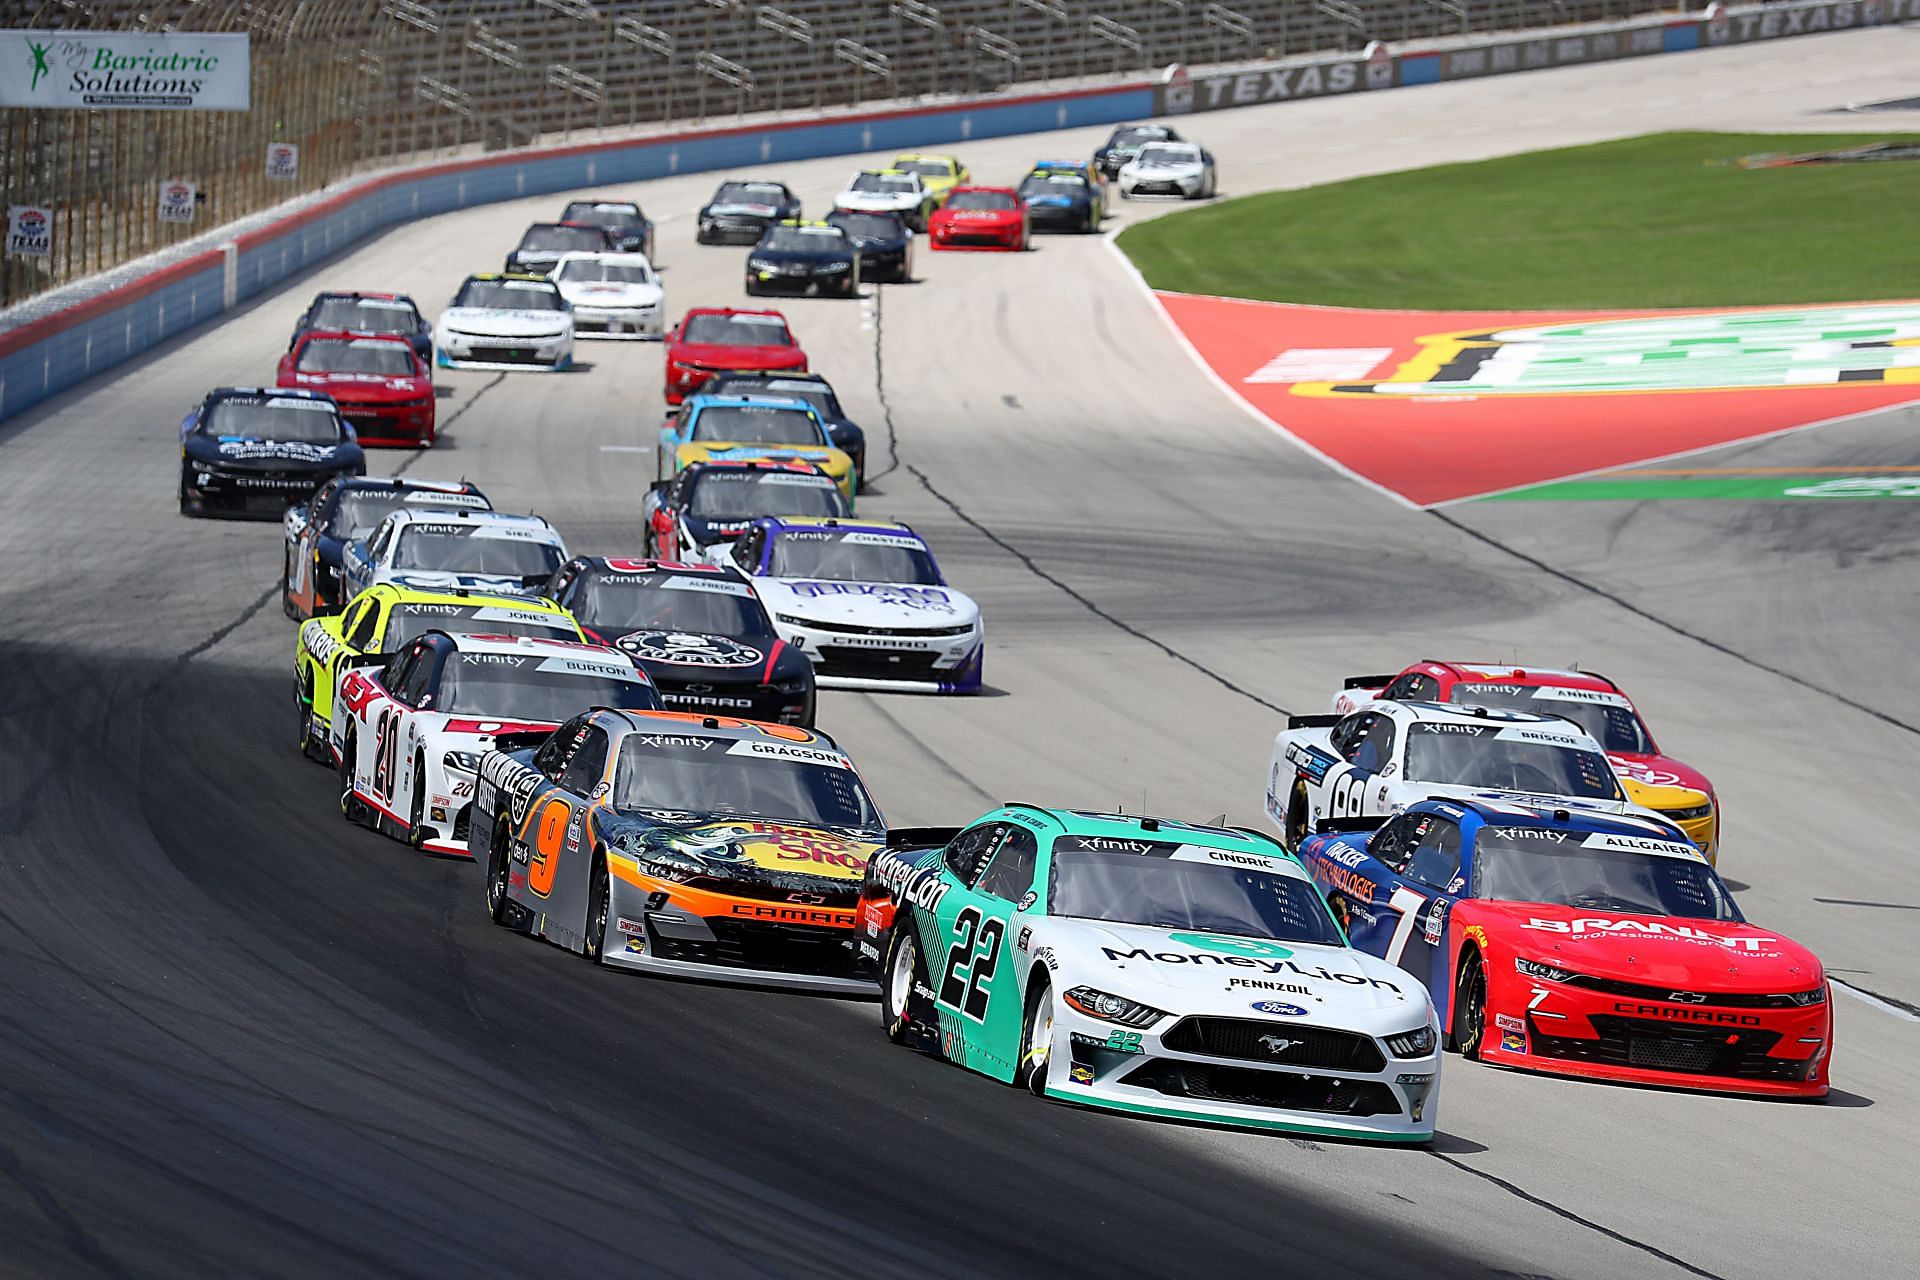 Nascar Opts Against Using Resin At Texas Motor Speedway Ahead Of Xfinity And Cup Races